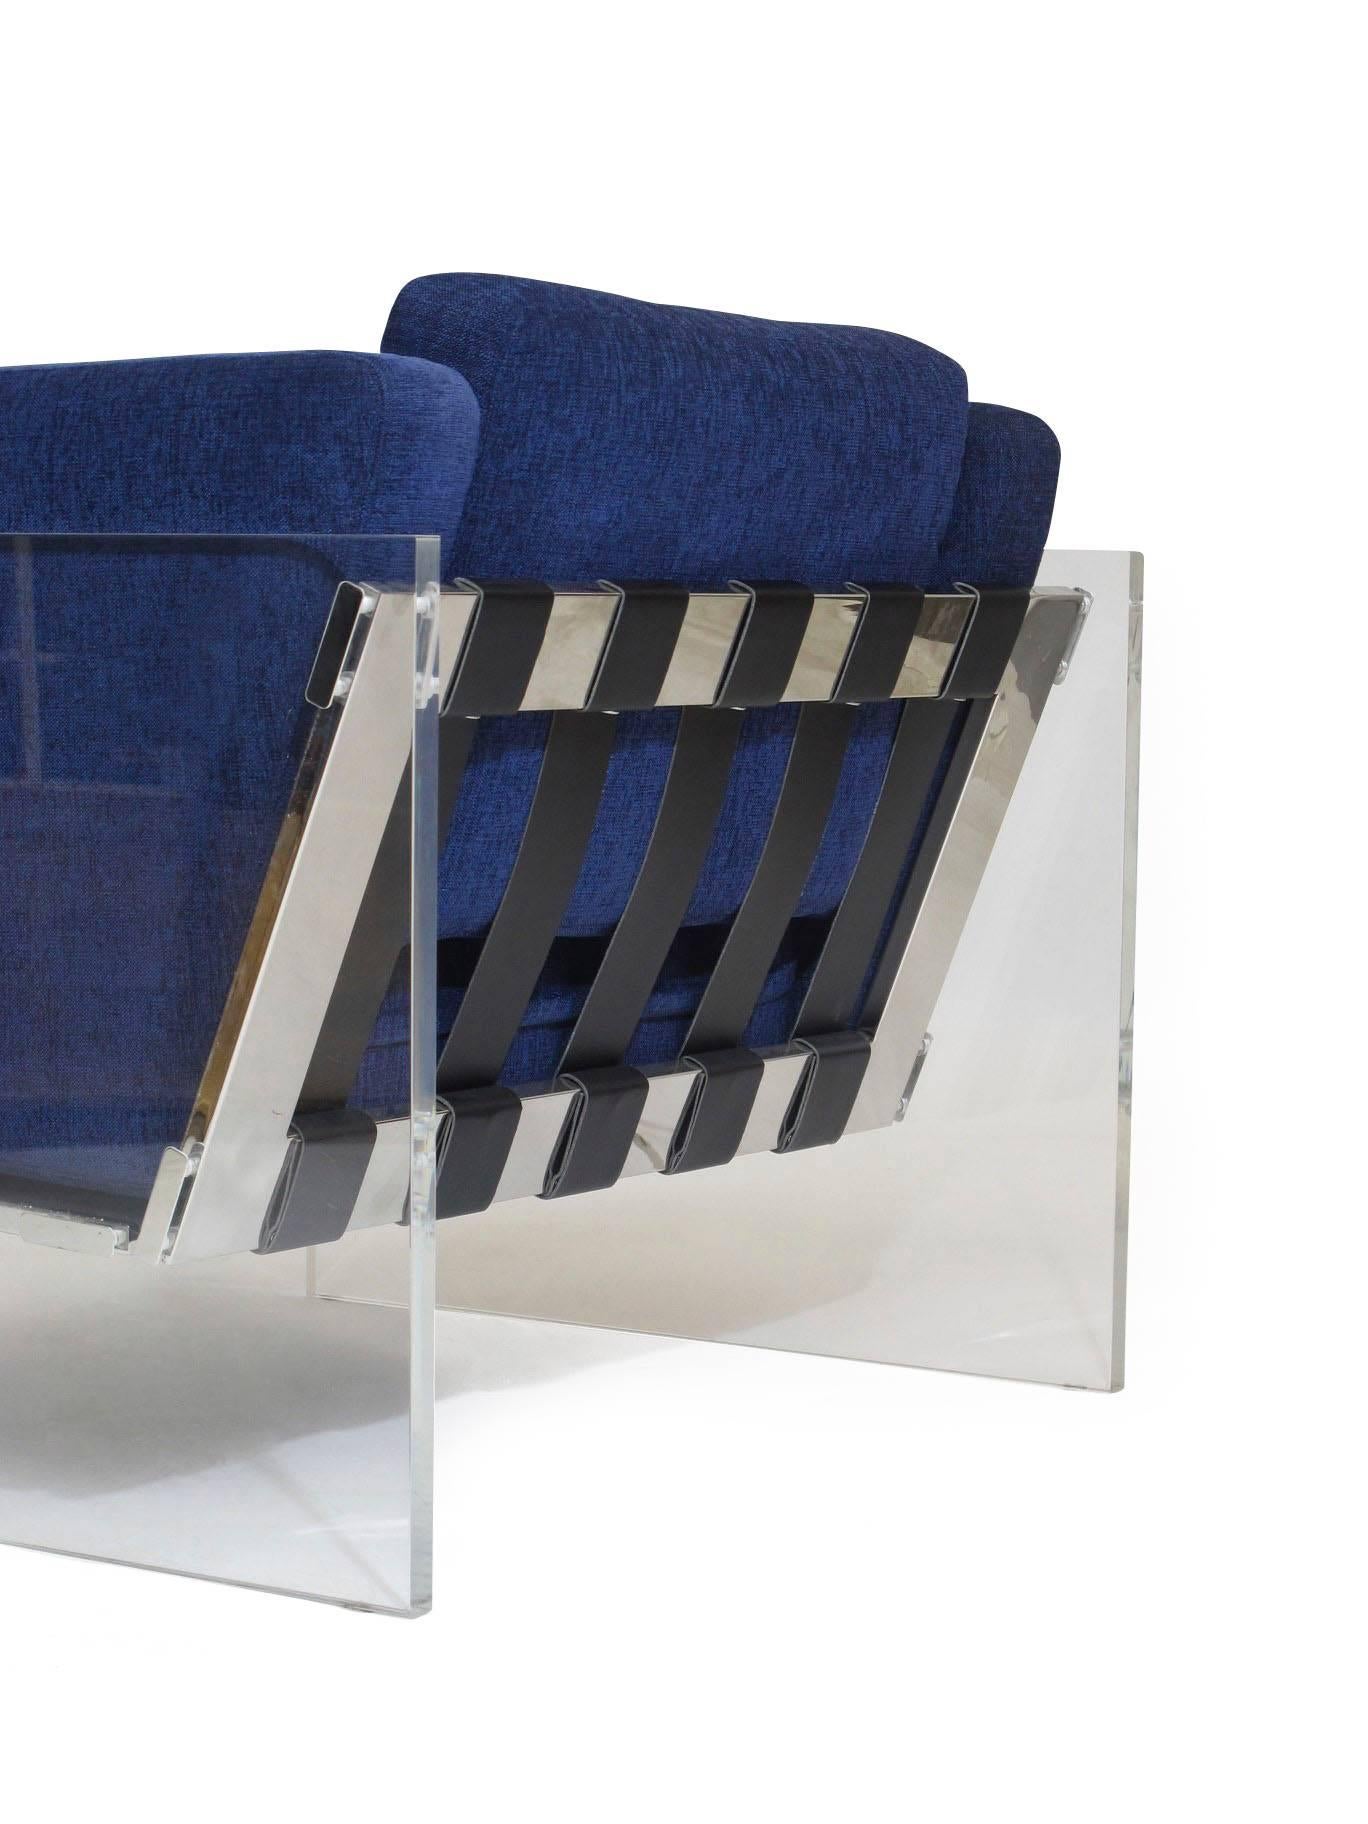 20th Century Milo Baughman for Thayer Coggin Lucite Chrome Lounge Chair in Navy